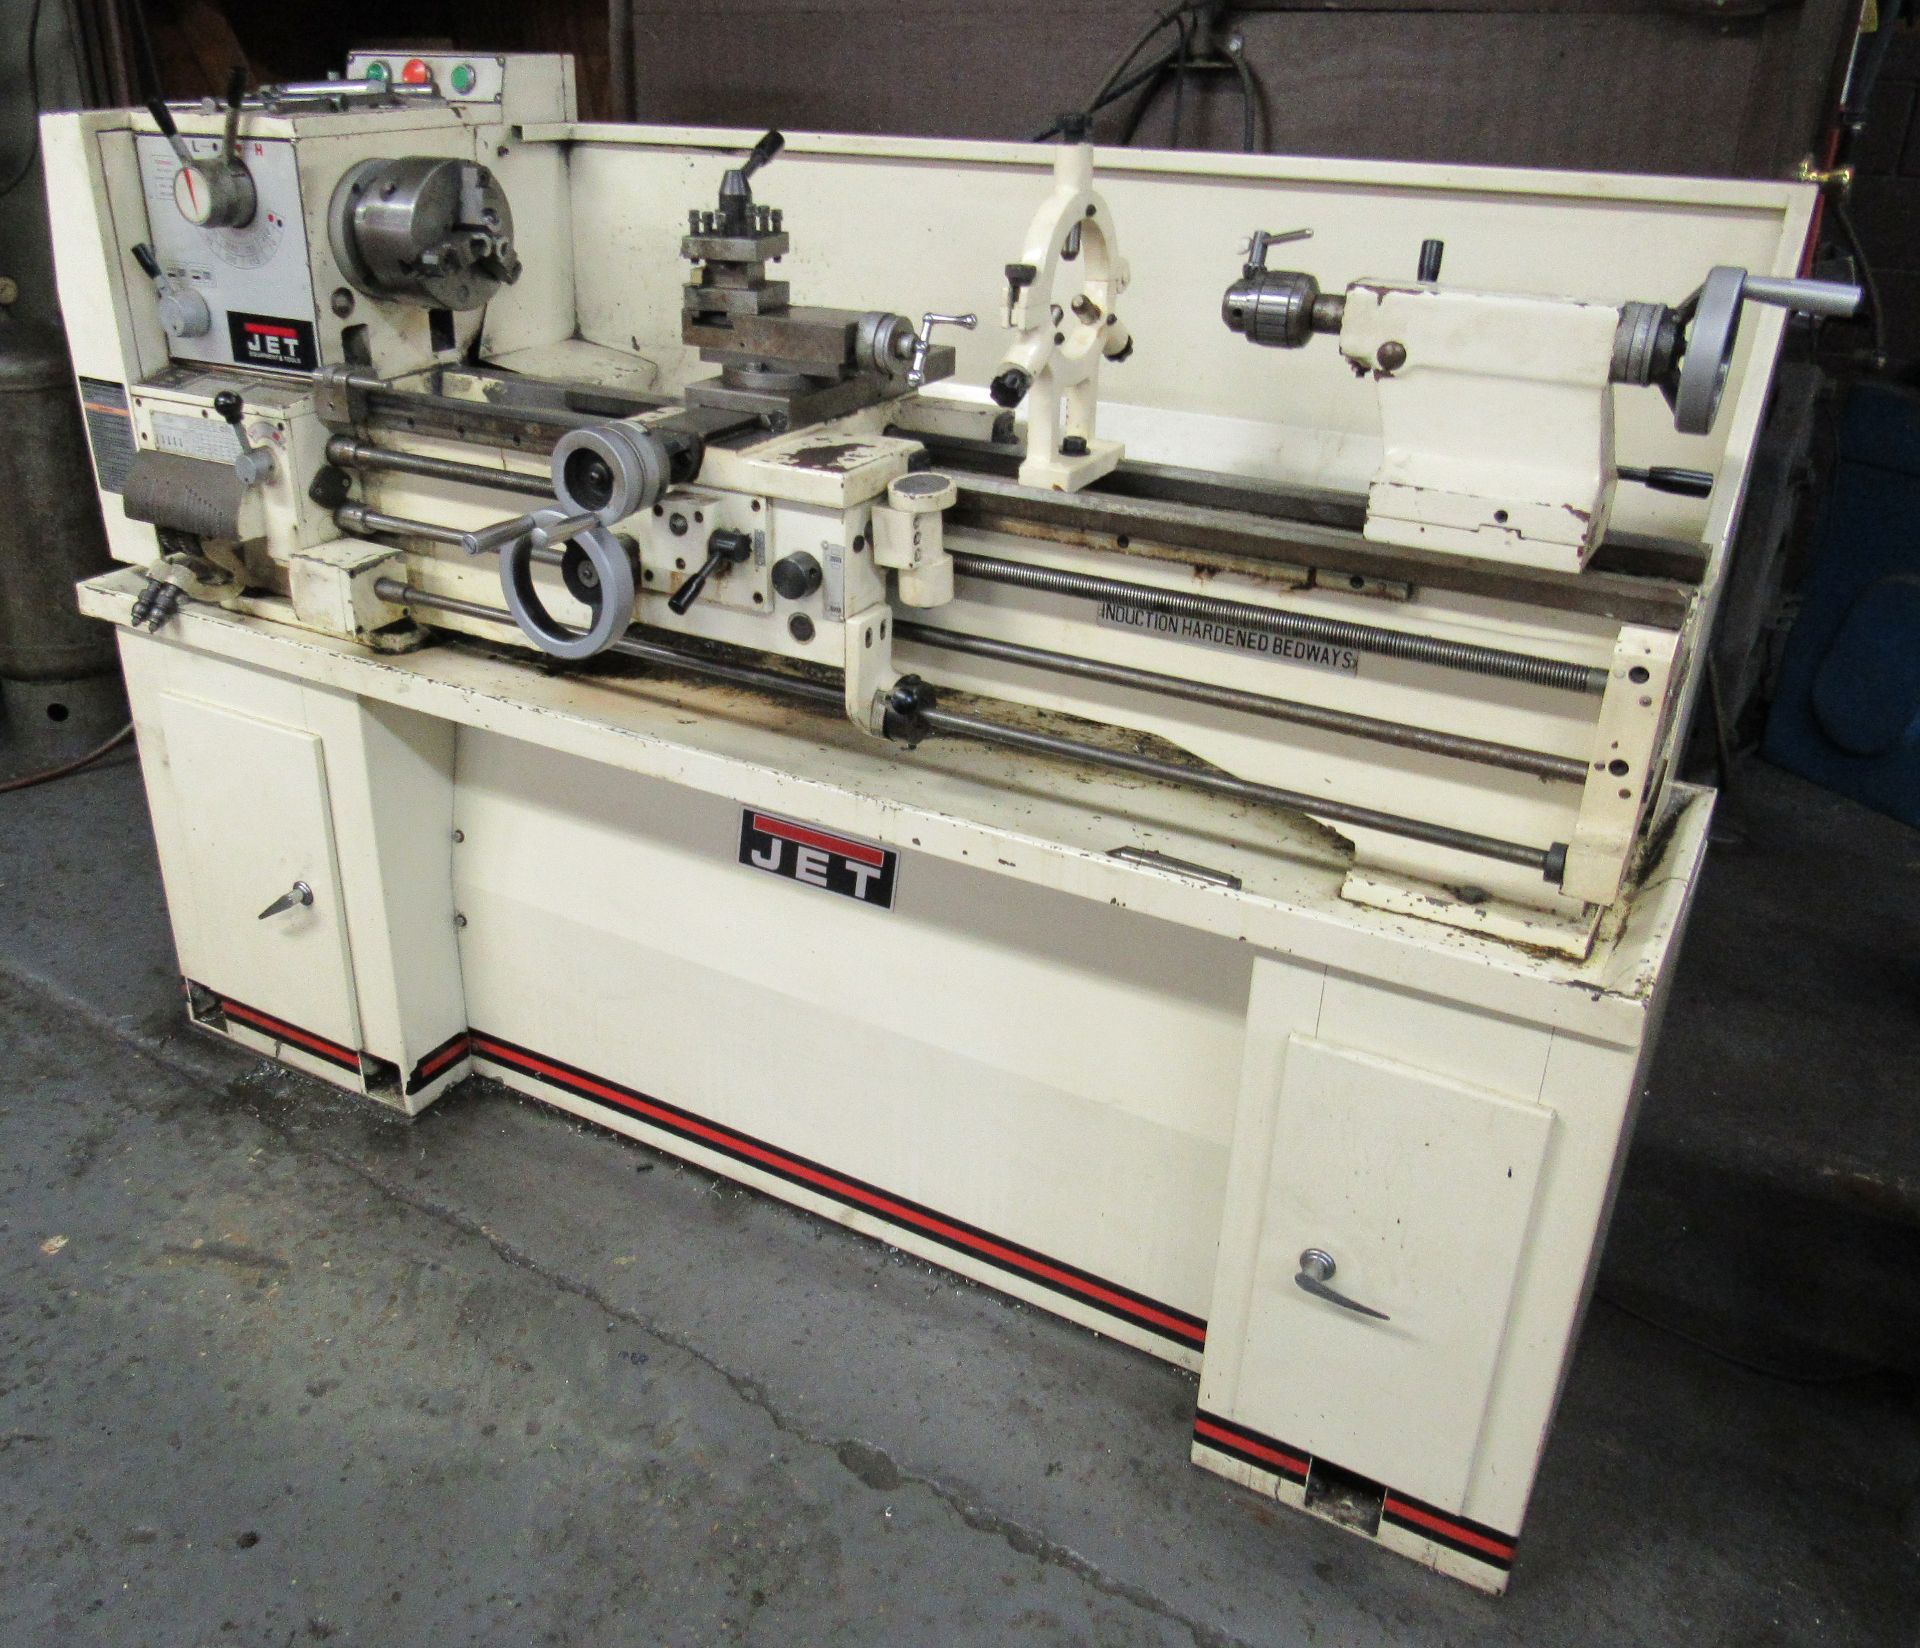 Jet Mod.GHB-1340 13"/18" x 40" Geared Gap Lathe - New 2000, Spindle Speeds 70 - 2000 RPM, 18-3/4" - Image 5 of 5